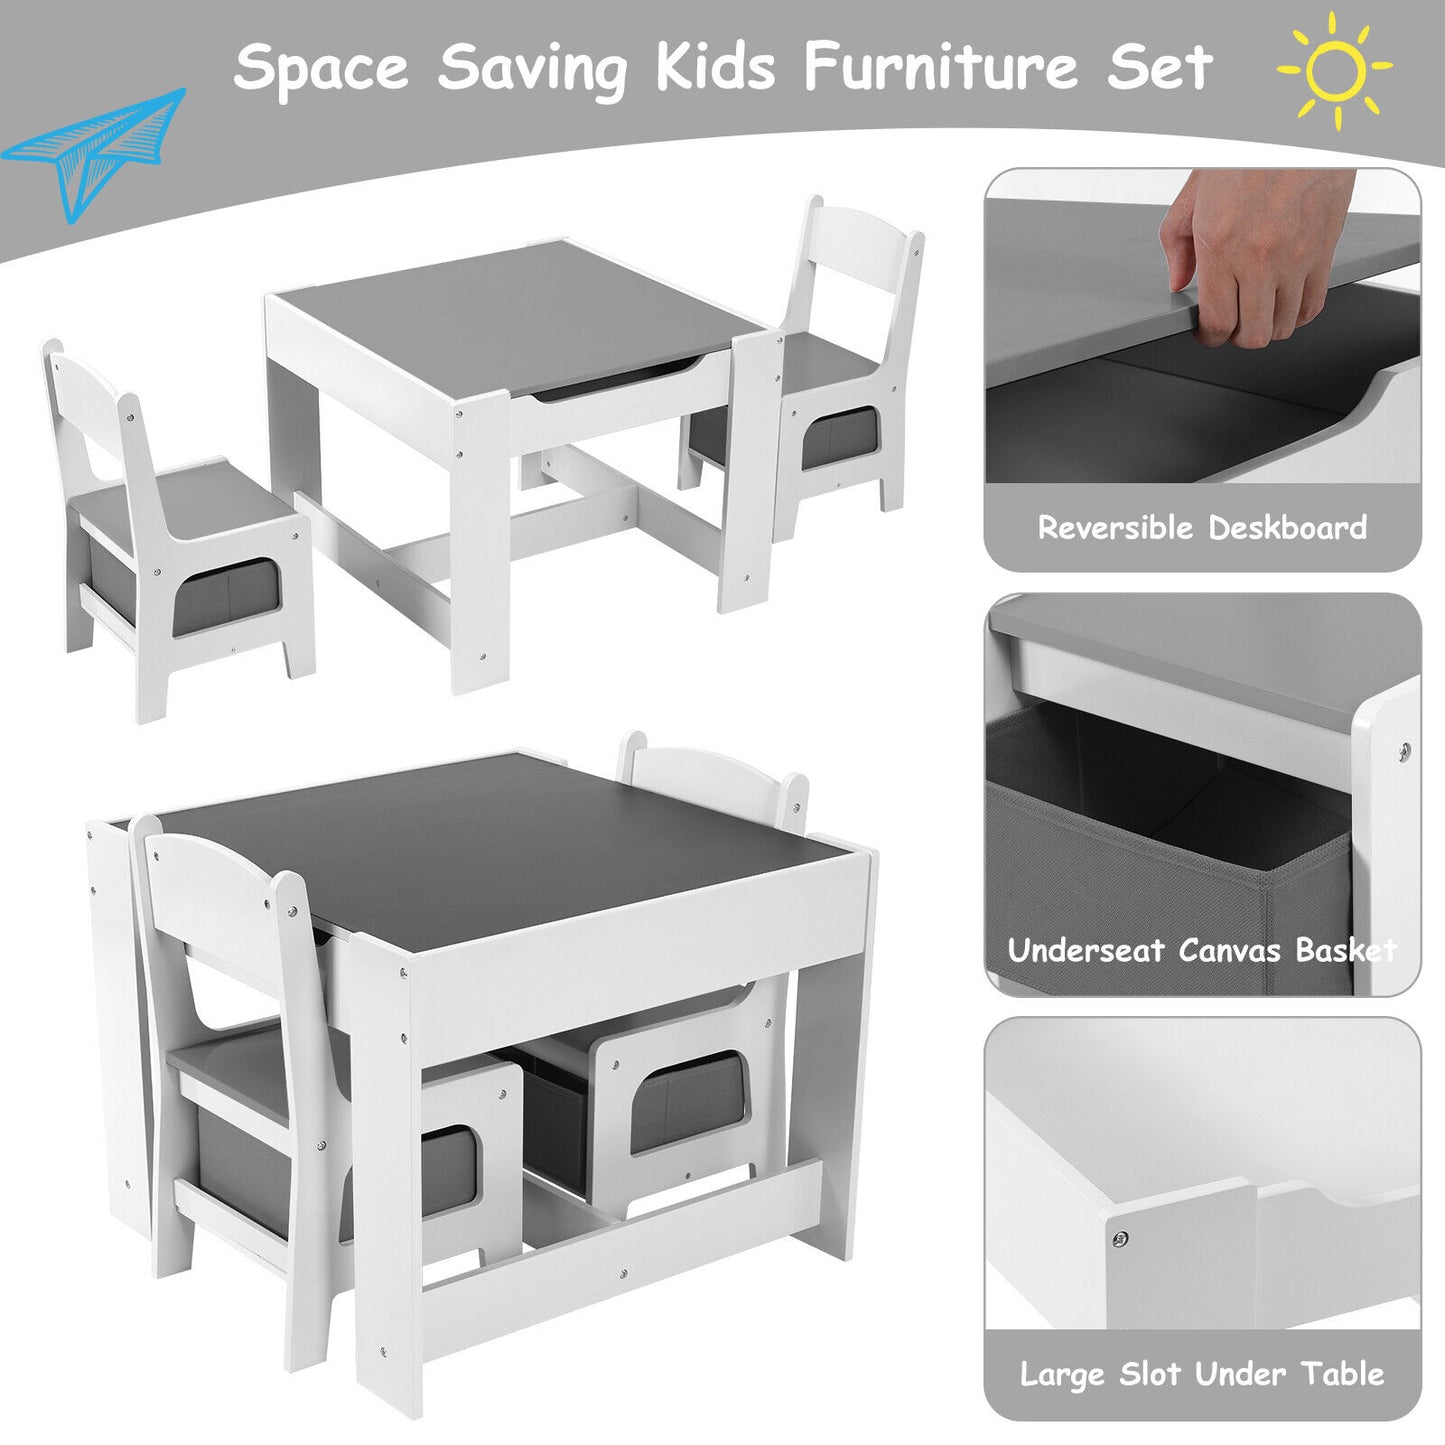 Arlopu Kids Table and 2 Chairs Set with Storage Drawer Children Writing Reading Table for Toddlers 2-8 Years